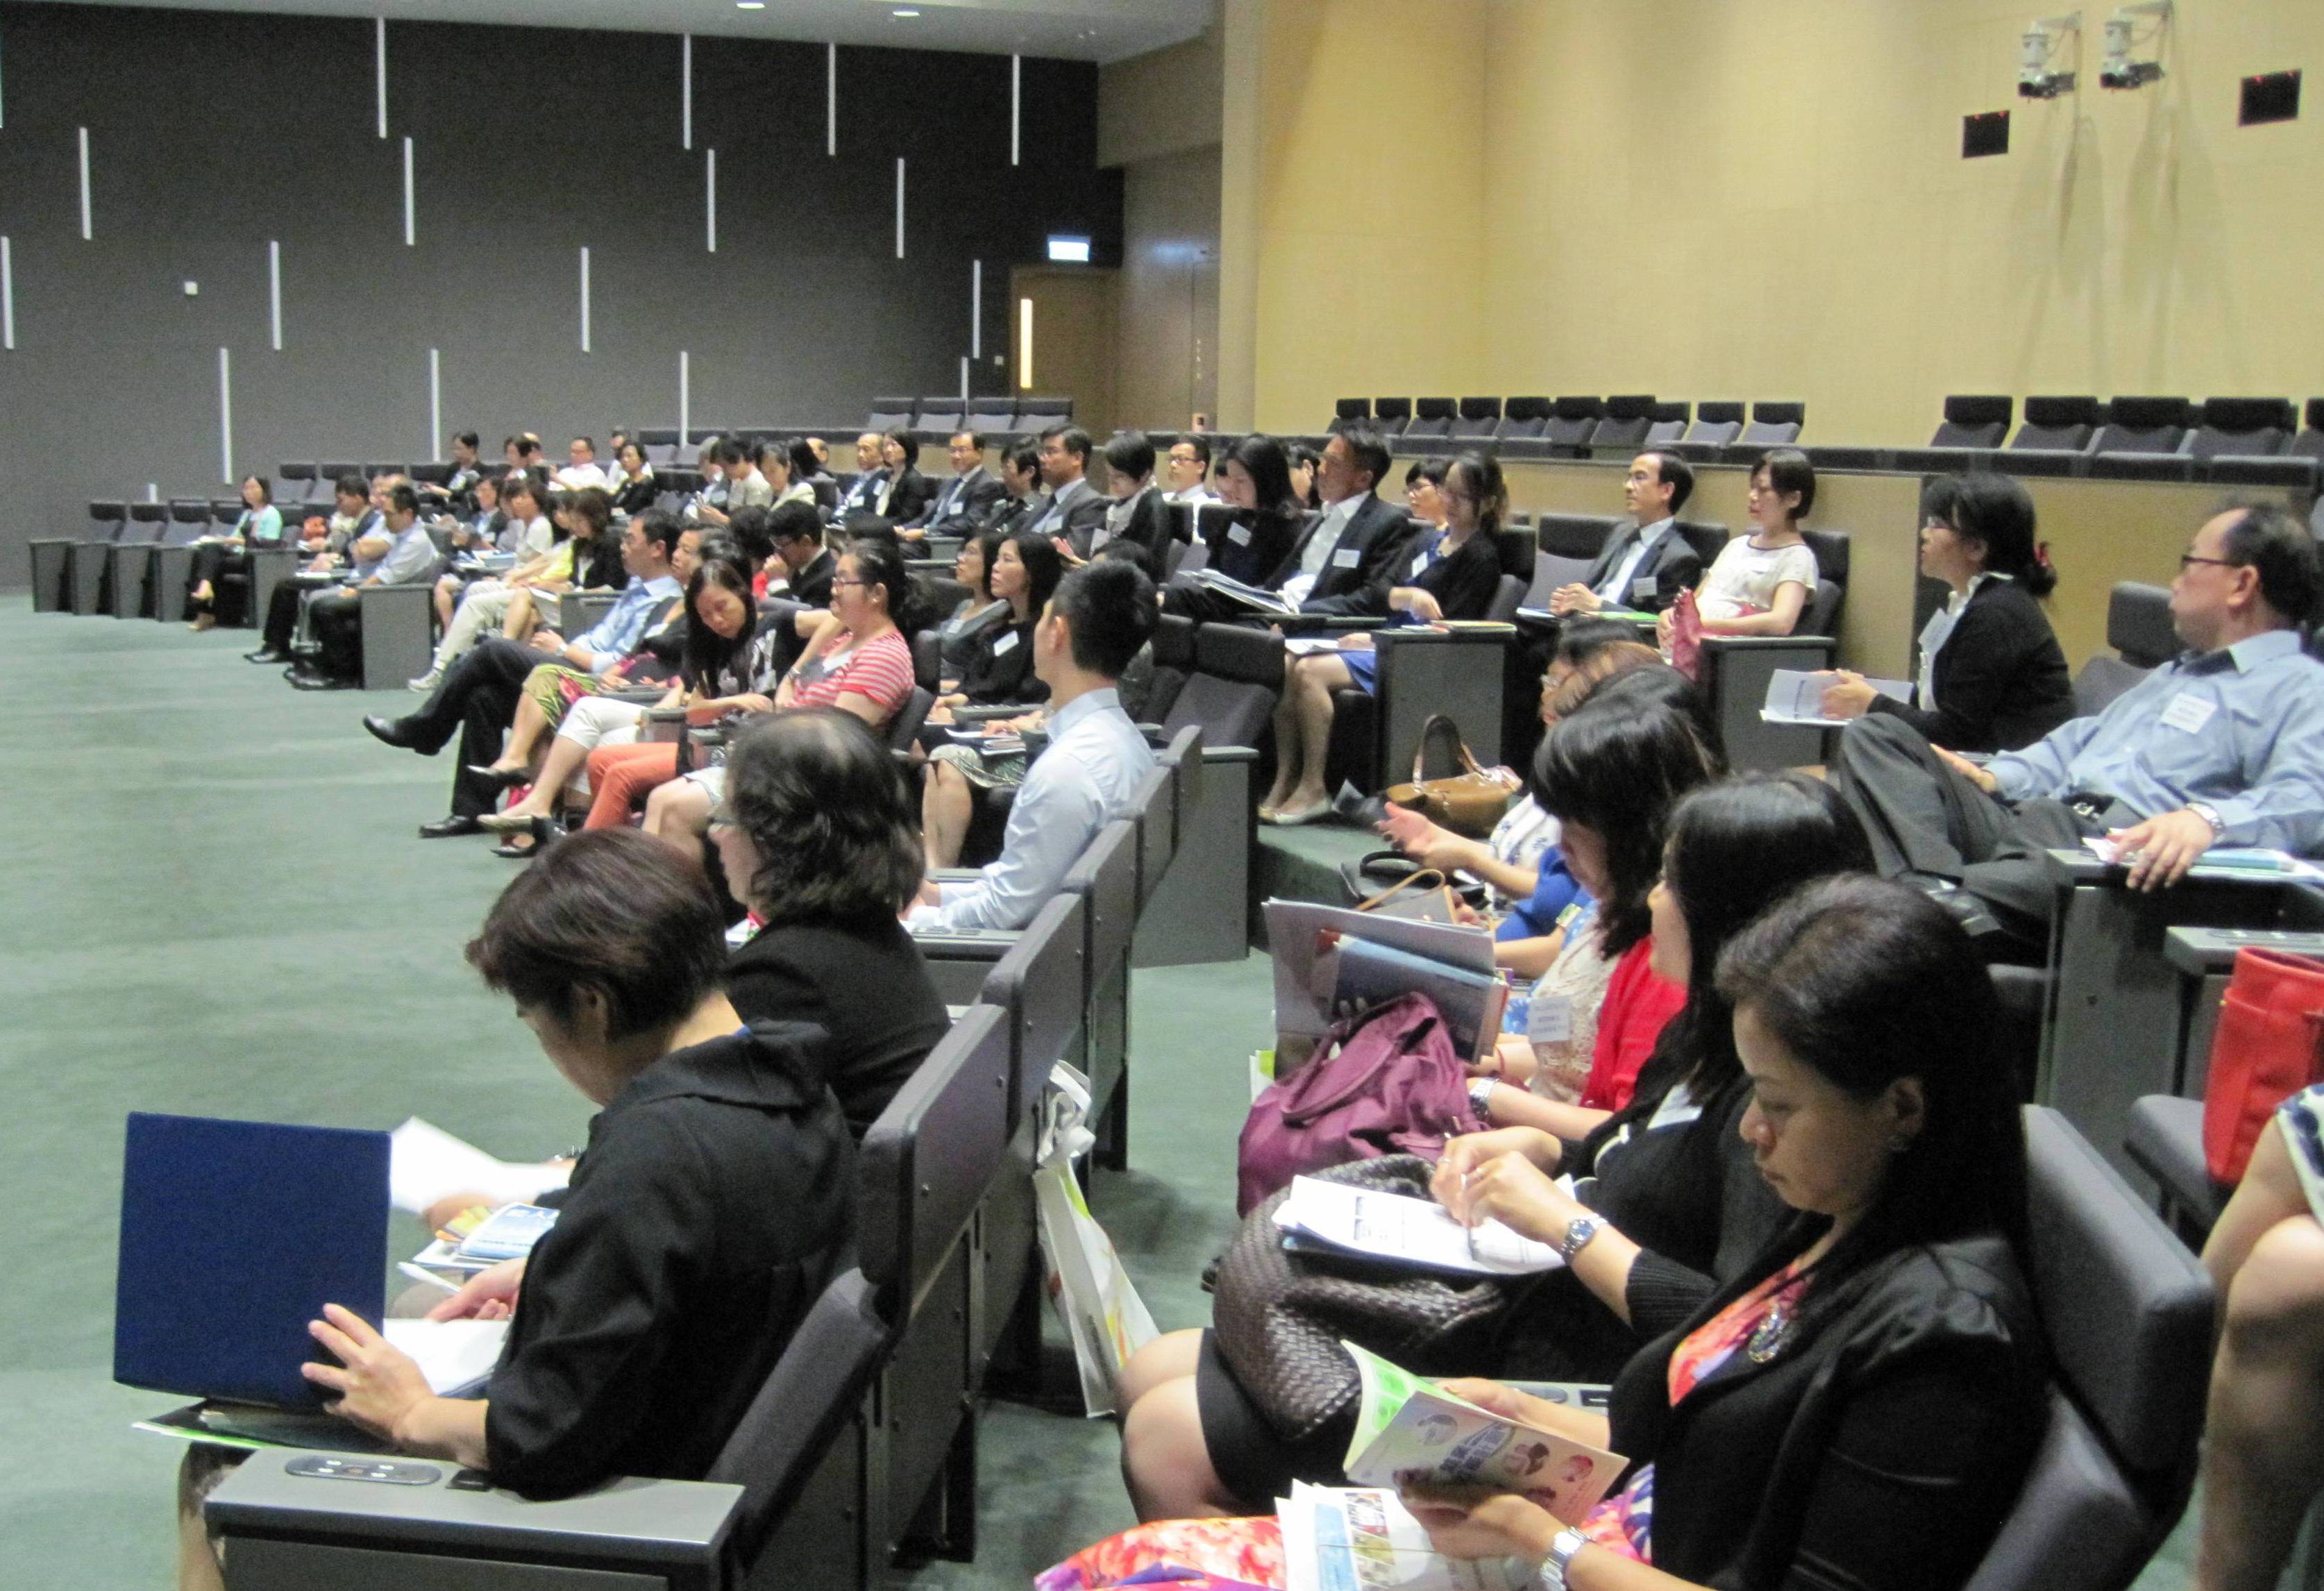 Representatives of employers from different sectors attended the briefing sessions